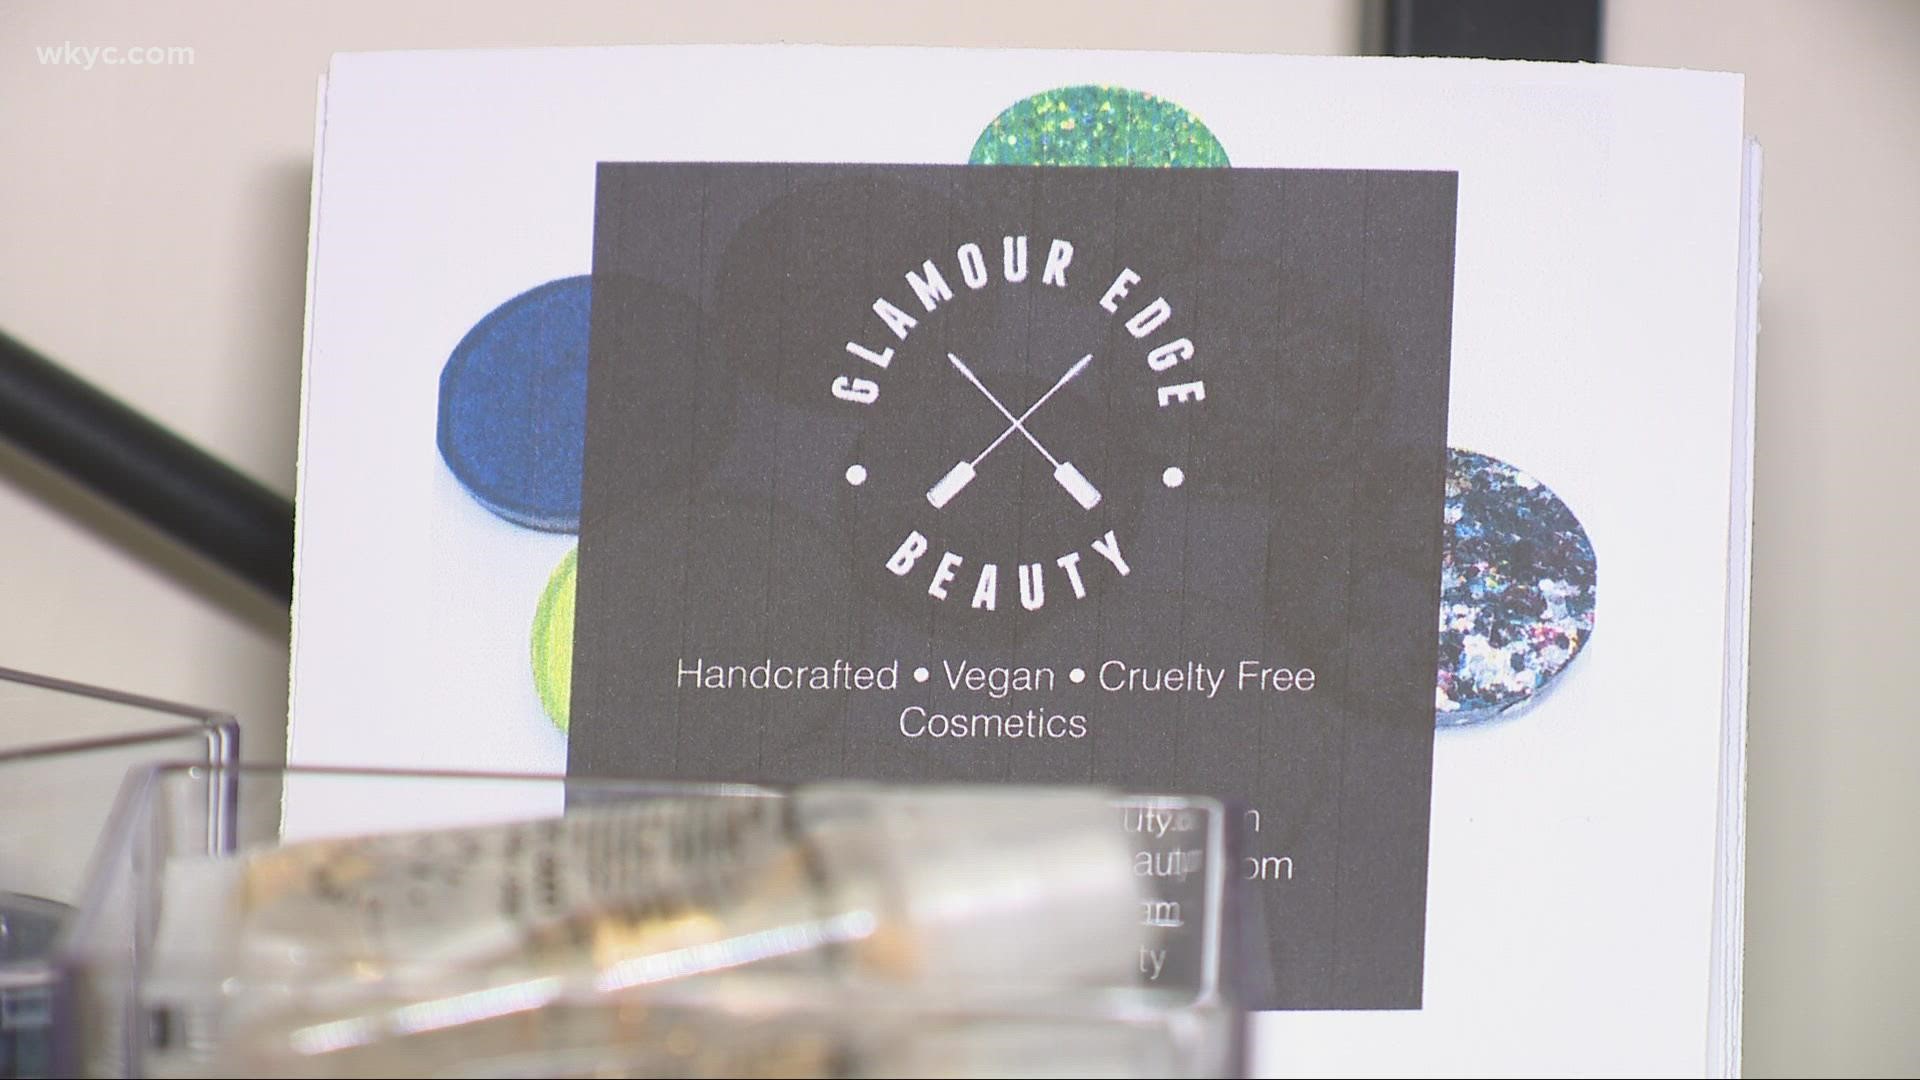 We check in with Glamour Edge Beauty owner Precious Russell ahead of Small Business Saturday.